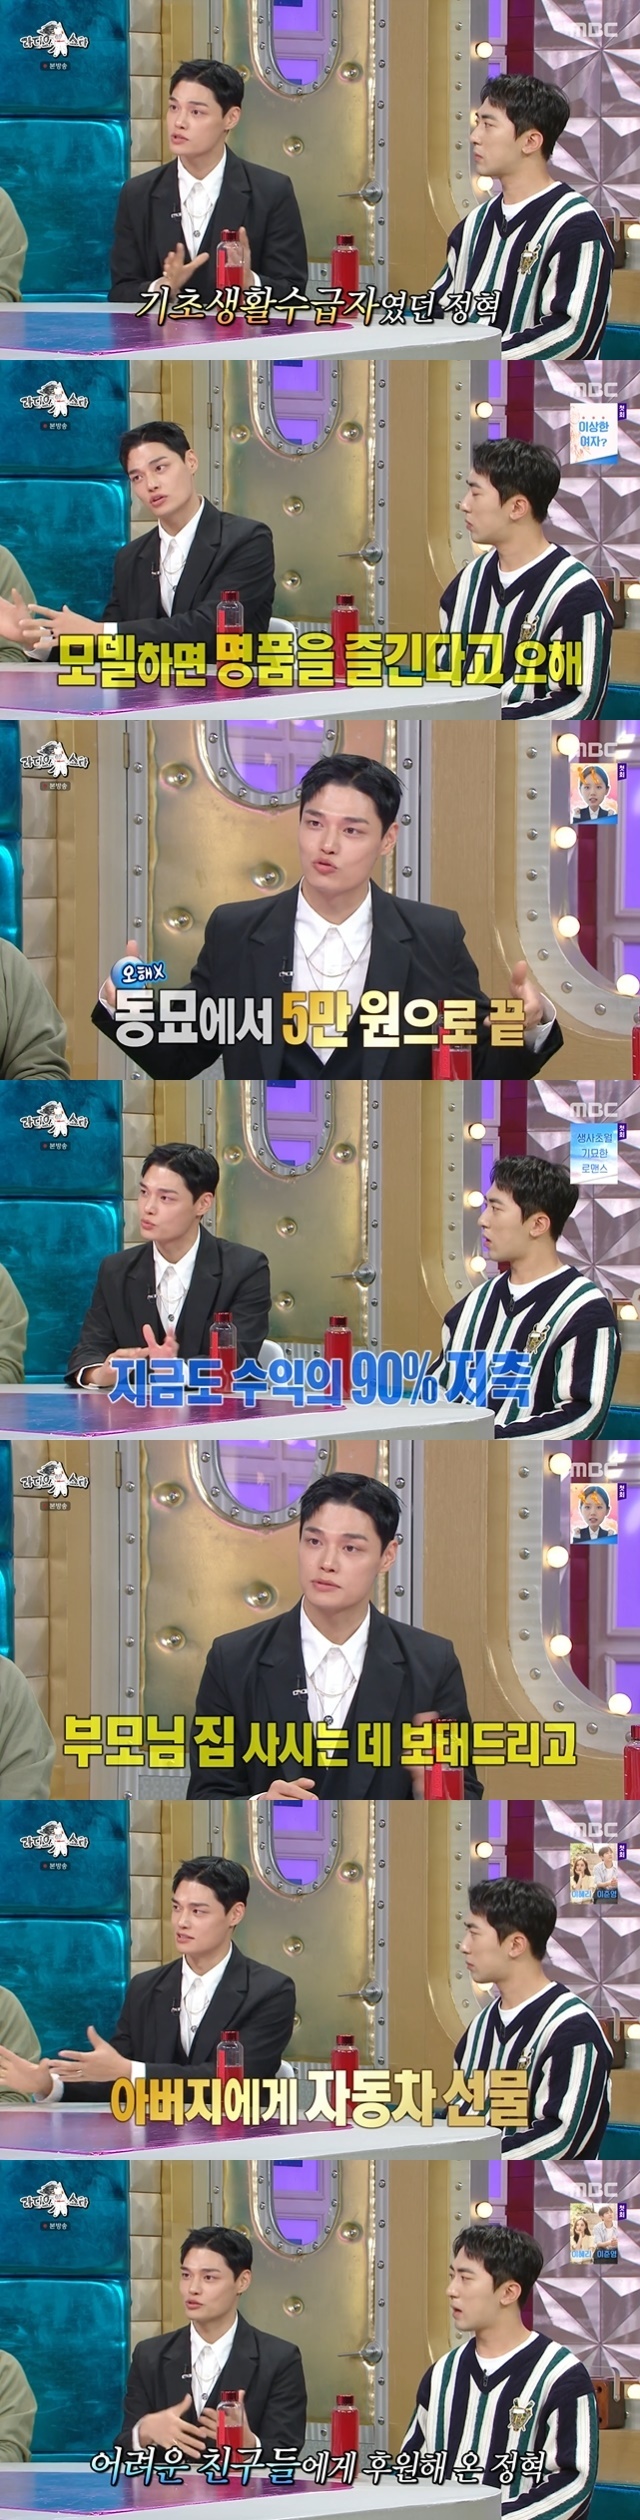 Model-born broadcaster Jung hyuk has focused attention on the difficult family history and the savings habits that have been settled in the virtue.In the 788th episode of MBCs entertainment Radio Star (hereinafter referred to as Radio Star), which aired on October 5, Jung hyuk appeared as a guest along with Lee Beom-soo, Lee Joon-hyuk and Kim Won-hoon.On this day, Jung hyuk attracted attention by revealing that he dreamed of a comedian as a child and even worked as a gag club.Jung hyuk, who also worked as a crew of SNL Korea, heard the word stone child from PD at the time, and he said, It was a praise for me.The reason why jung hyuk dreamed of being a comedian was actually due to his childhood environment. I was a child (home) and I was a basic livelihood recipient.My father raised himself and was not hygienic, so I was introverted and bullied. If it is a lot of hard, I am excited to wait for the time of the gag concert on Sunday night as if I were looking for light in a dark place.I did not want the band song to end, he confessed to himself as a child. I thought, I should try it too, while watching a person who is good and energetic. I went to the gag theater Gag Guy and prepared the bond. I gave up. Jung hyuk, who gave up the comedian, started working on the fashion side that he liked as much as gag.In the meantime, it was a clothing brand store where I worked, and I received a friendly employee award by responding to refund customers with a sense of sense, and I made a promotion that took a year in three months.There was a lot of rumors that I was a good-looking employee at the time, and there were a lot of female part-timers in the workplace, and I said, Why are you here?Why do not you do Model? So I thought, Lets try it once. He said that he changed his job from a clothing store employee to Model.Jung hyuk, who made his debut as Model at a somewhat late age of 25, did not walk the flower path straight away; he said: I lost too much flesh and felt drunk, so it was close to decadence.I had to go to personality.The mans walking is like Gosers like Kim Won-jung, Byun Woo-suk, and Nam Joo-hyuk, and I went to Sporty and Street because I am a character far from such good-looking. Jung hyuk said that things started to work out well, taking such a direction.This jung hyuk had a job and appearance that Flex seemed to be a hobby, but in reality he was a sweet tech master, he said, When I was a child, I lived in poverty and I had a saving habit.I think Model will wear luxury goods, but I will wear 50,000 won in Dongmyo and buy a bag and two bags.I do not think that I will be cool if I see good luxury goods. I was surprised to say that my first salary was 80,000 won, and that I saved 80,000 won, and I am still saving about 90% of my profits.Asked if he was investing, he replied, There is investment in the savings.When asked about the biggest money I spent in my life, jung hyuk said, It is money I spend on others rather than my own. My parents buy a house, my mother helps me go home and go.My father had no car. He had no concept of car because he was in a car center, but he first told me to go camping.At first, he said, Its okay. When the car came, he was proud to be like the youngest child, like his third child. 